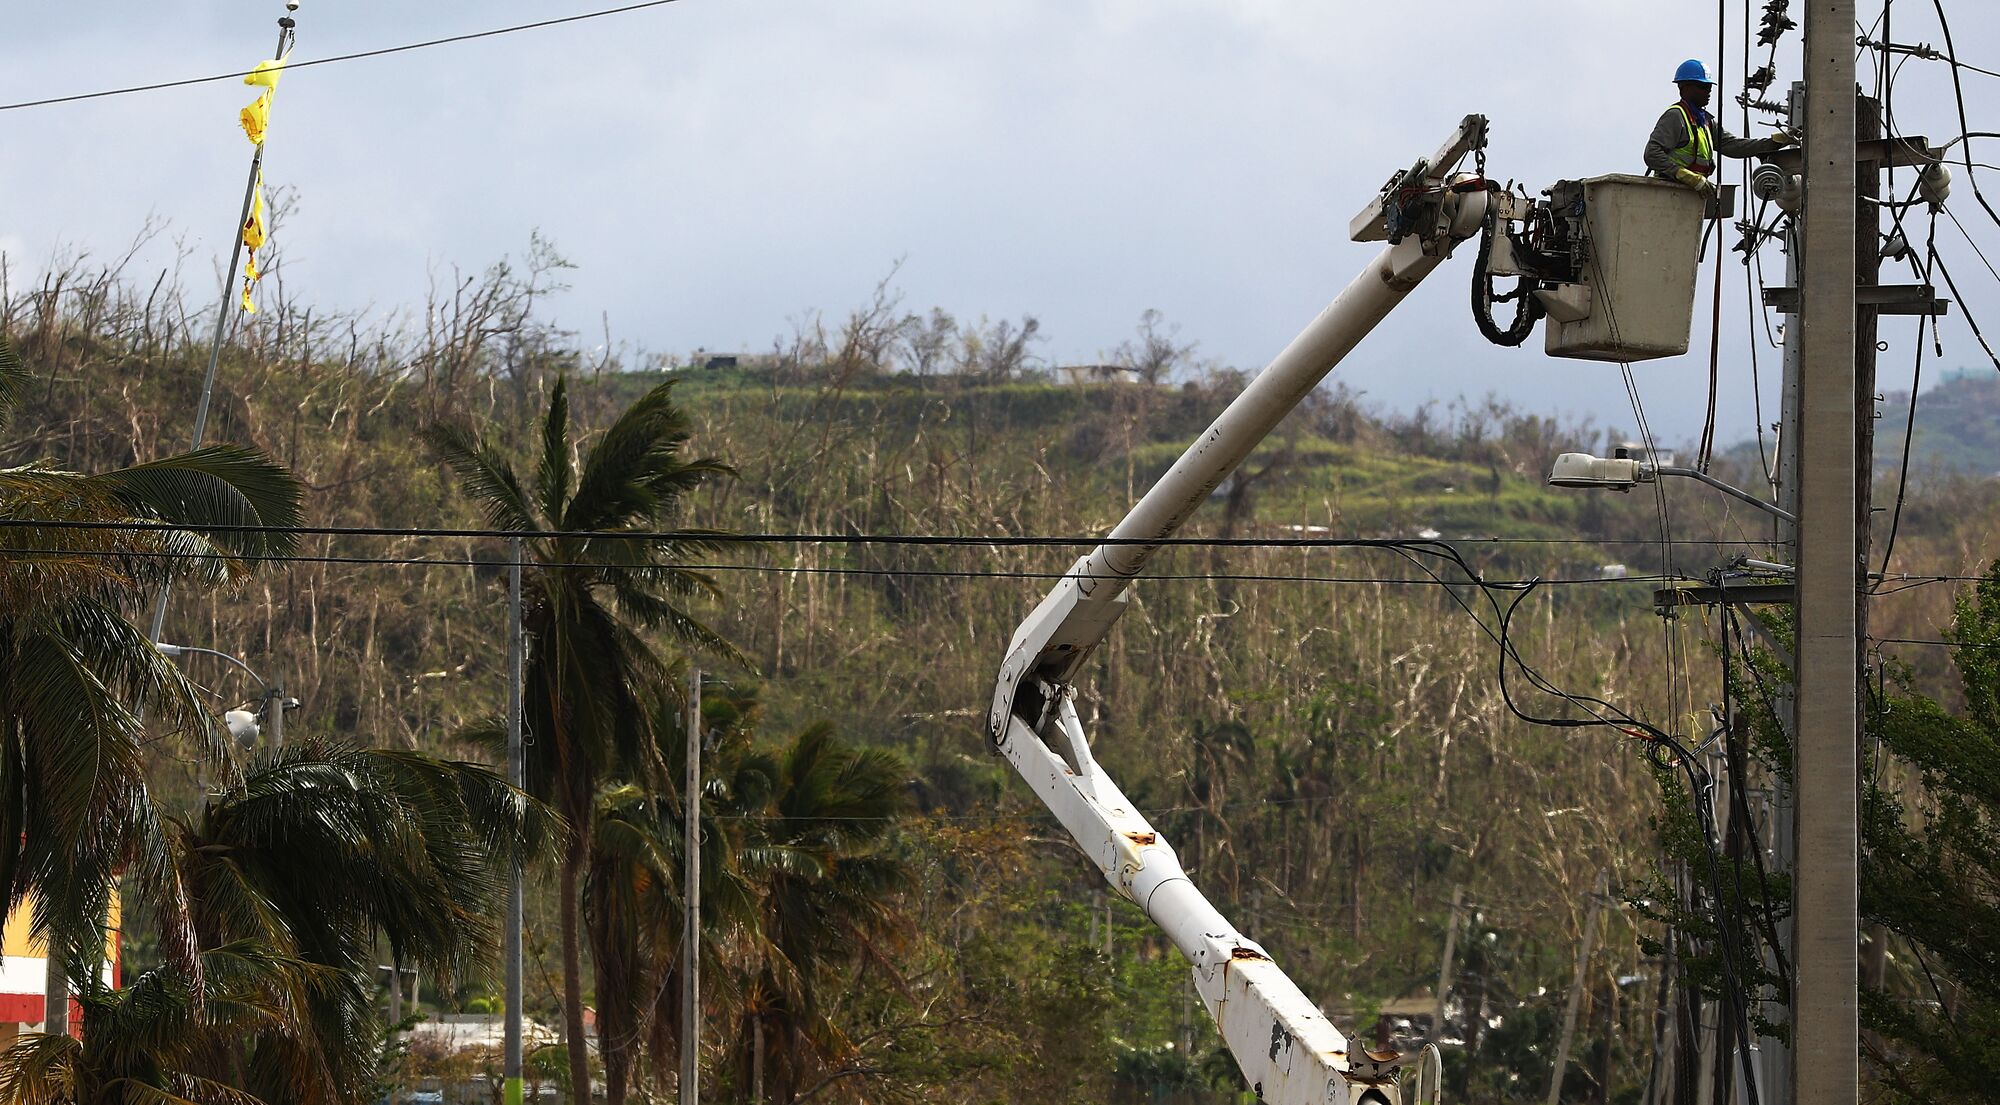 A worker repairs power lines about two weeks after Hurricane Maria swept through the island on October 5, 2017 in San Isidro, Puerto Rico. Puerto Rico experienced widespread damage including most of the electrical, gas and water grid as well as agriculture after Hurricane Maria, a category 4 hurricane, swept through.